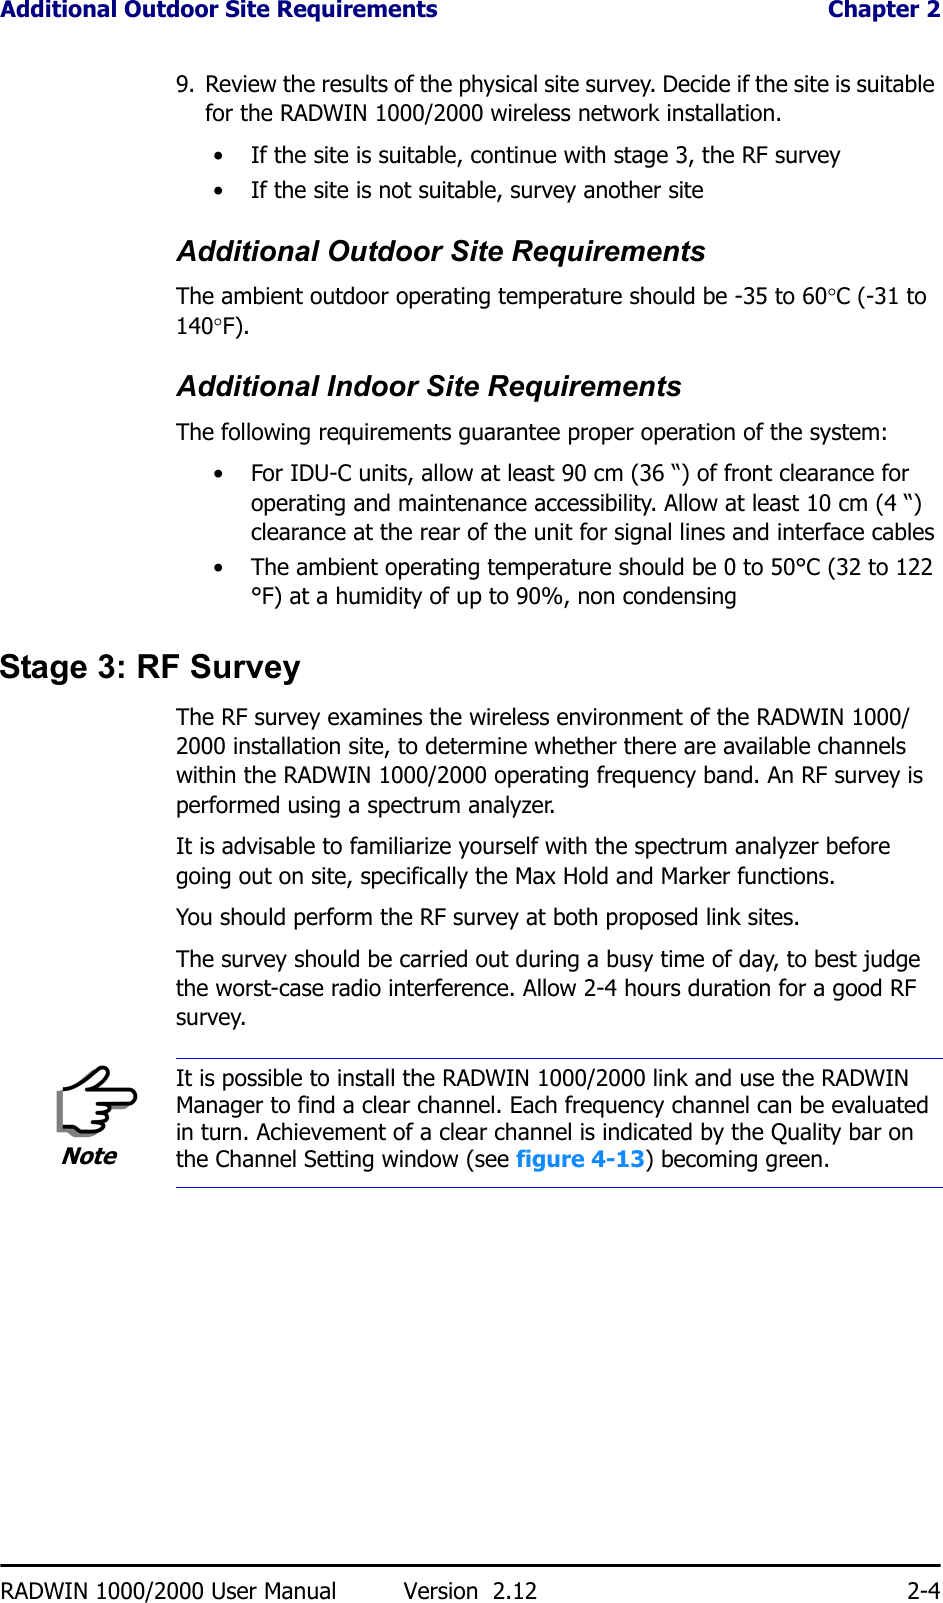 Additional Outdoor Site Requirements  Chapter 2RADWIN 1000/2000 User Manual Version  2.12 2-49. Review the results of the physical site survey. Decide if the site is suitable for the RADWIN 1000/2000 wireless network installation.• If the site is suitable, continue with stage 3, the RF survey• If the site is not suitable, survey another siteAdditional Outdoor Site RequirementsThe ambient outdoor operating temperature should be -35 to 60°C (-31 to 140°F).Additional Indoor Site RequirementsThe following requirements guarantee proper operation of the system:• For IDU-C units, allow at least 90 cm (36 “) of front clearance for operating and maintenance accessibility. Allow at least 10 cm (4 “) clearance at the rear of the unit for signal lines and interface cables• The ambient operating temperature should be 0 to 50°C (32 to 122 °F) at a humidity of up to 90%, non condensingStage 3: RF SurveyThe RF survey examines the wireless environment of the RADWIN 1000/2000 installation site, to determine whether there are available channels within the RADWIN 1000/2000 operating frequency band. An RF survey is performed using a spectrum analyzer.It is advisable to familiarize yourself with the spectrum analyzer before going out on site, specifically the Max Hold and Marker functions.You should perform the RF survey at both proposed link sites.The survey should be carried out during a busy time of day, to best judge the worst-case radio interference. Allow 2-4 hours duration for a good RF survey.NoteIt is possible to install the RADWIN 1000/2000 link and use the RADWIN Manager to find a clear channel. Each frequency channel can be evaluated in turn. Achievement of a clear channel is indicated by the Quality bar on the Channel Setting window (see figure 4-13) becoming green.